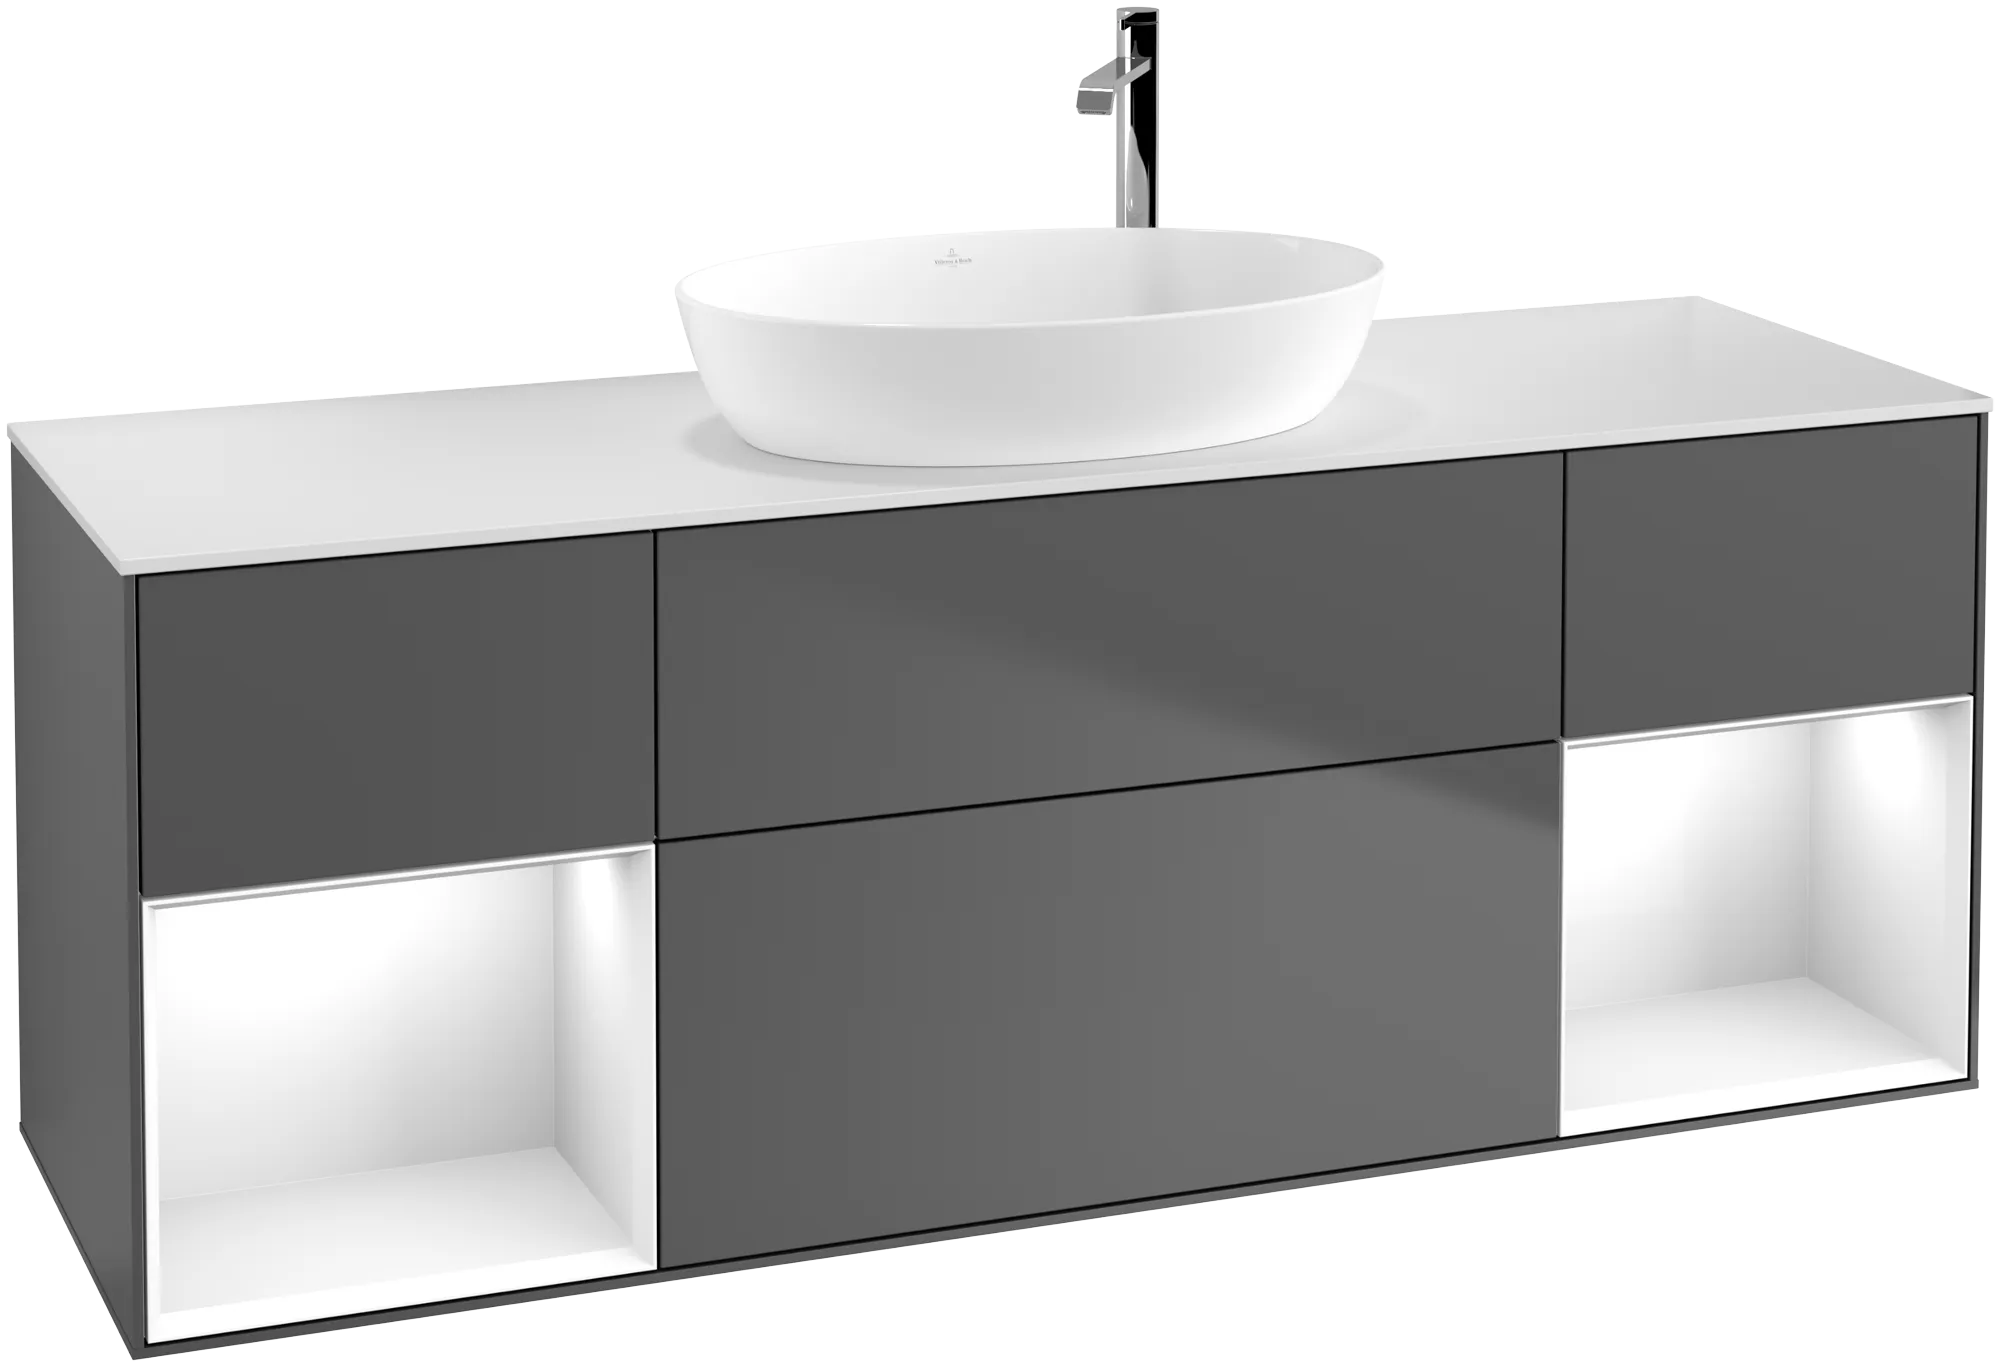 VILLEROY BOCH Finion Vanity unit, with lighting, 4 pull-out compartments, 1600 x 603 x 501 mm, Anthracite Matt Lacquer / Glossy White Lacquer / Glass White Matt #G981GFGK resmi